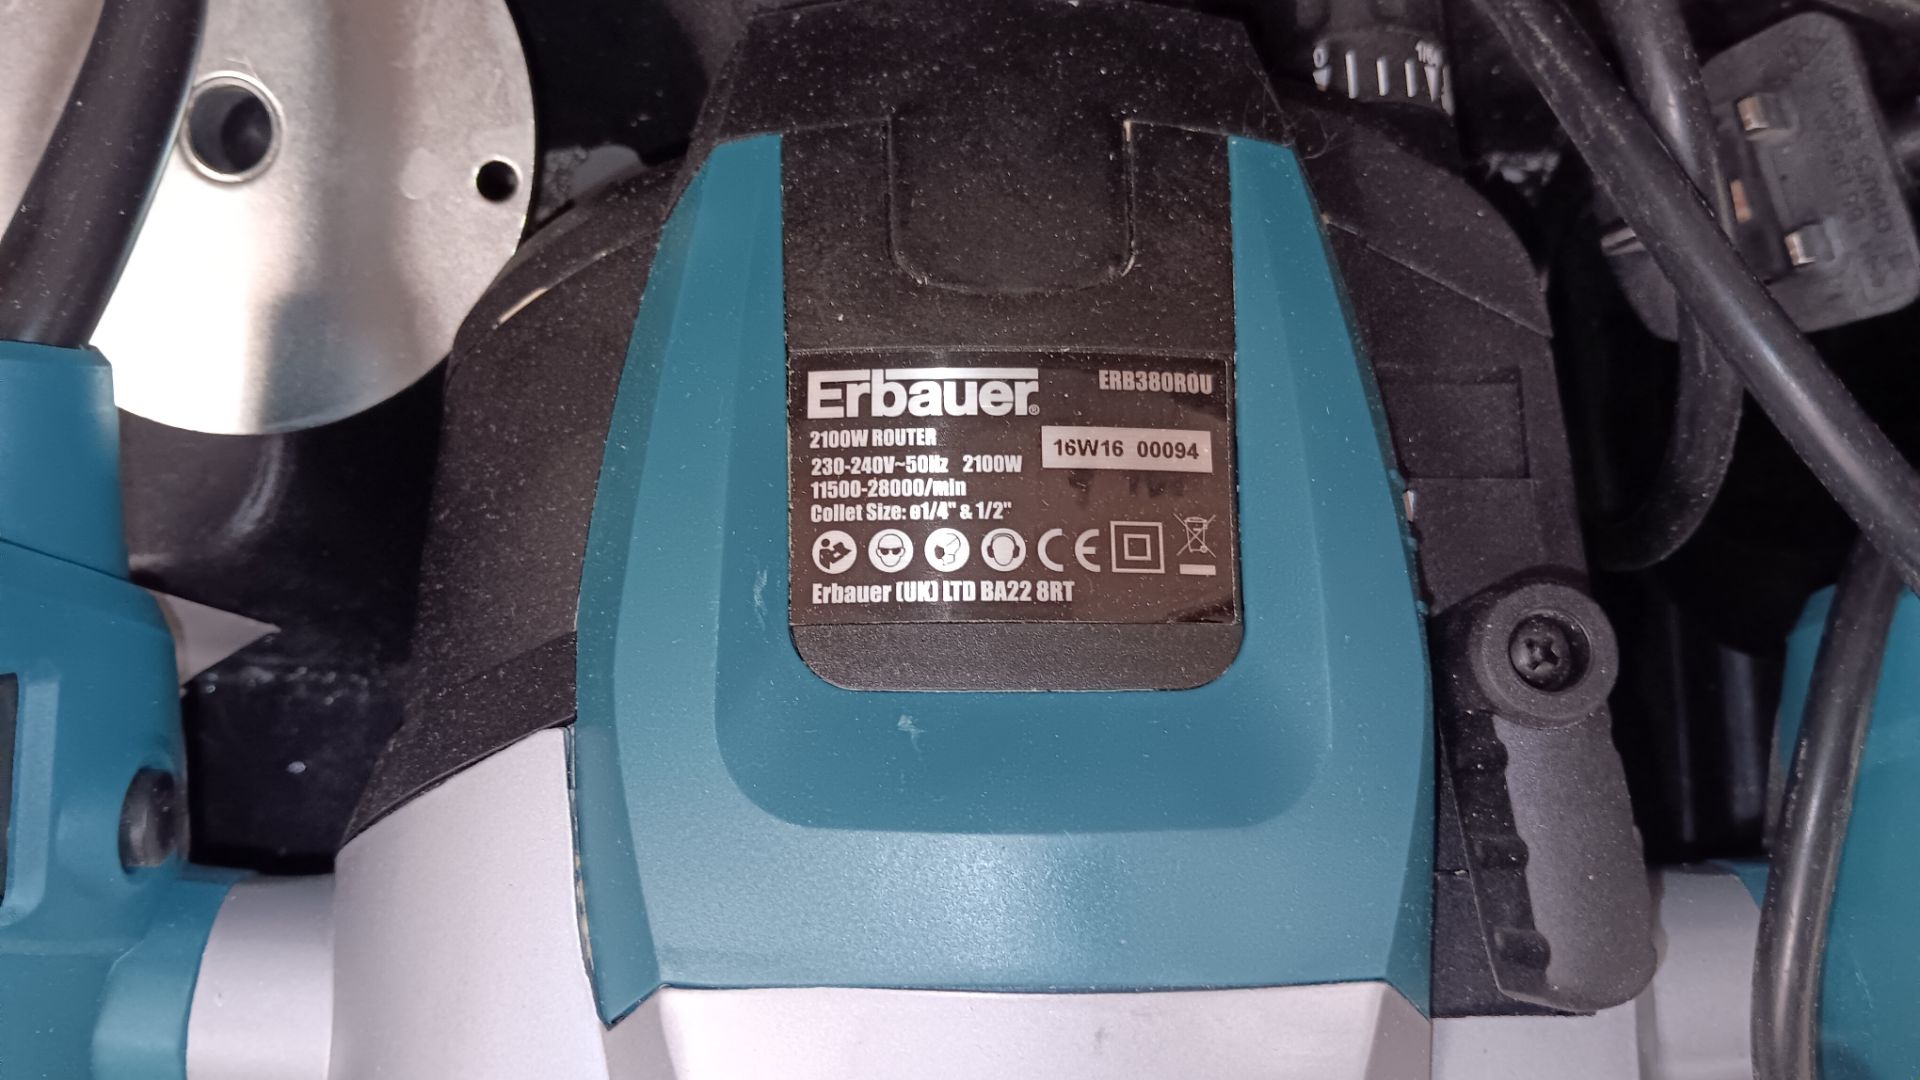 Erbauer ERB380ROU 2,100w Router, serial number 16W16 00094, 240V – Located in Unit 3 - Image 3 of 3